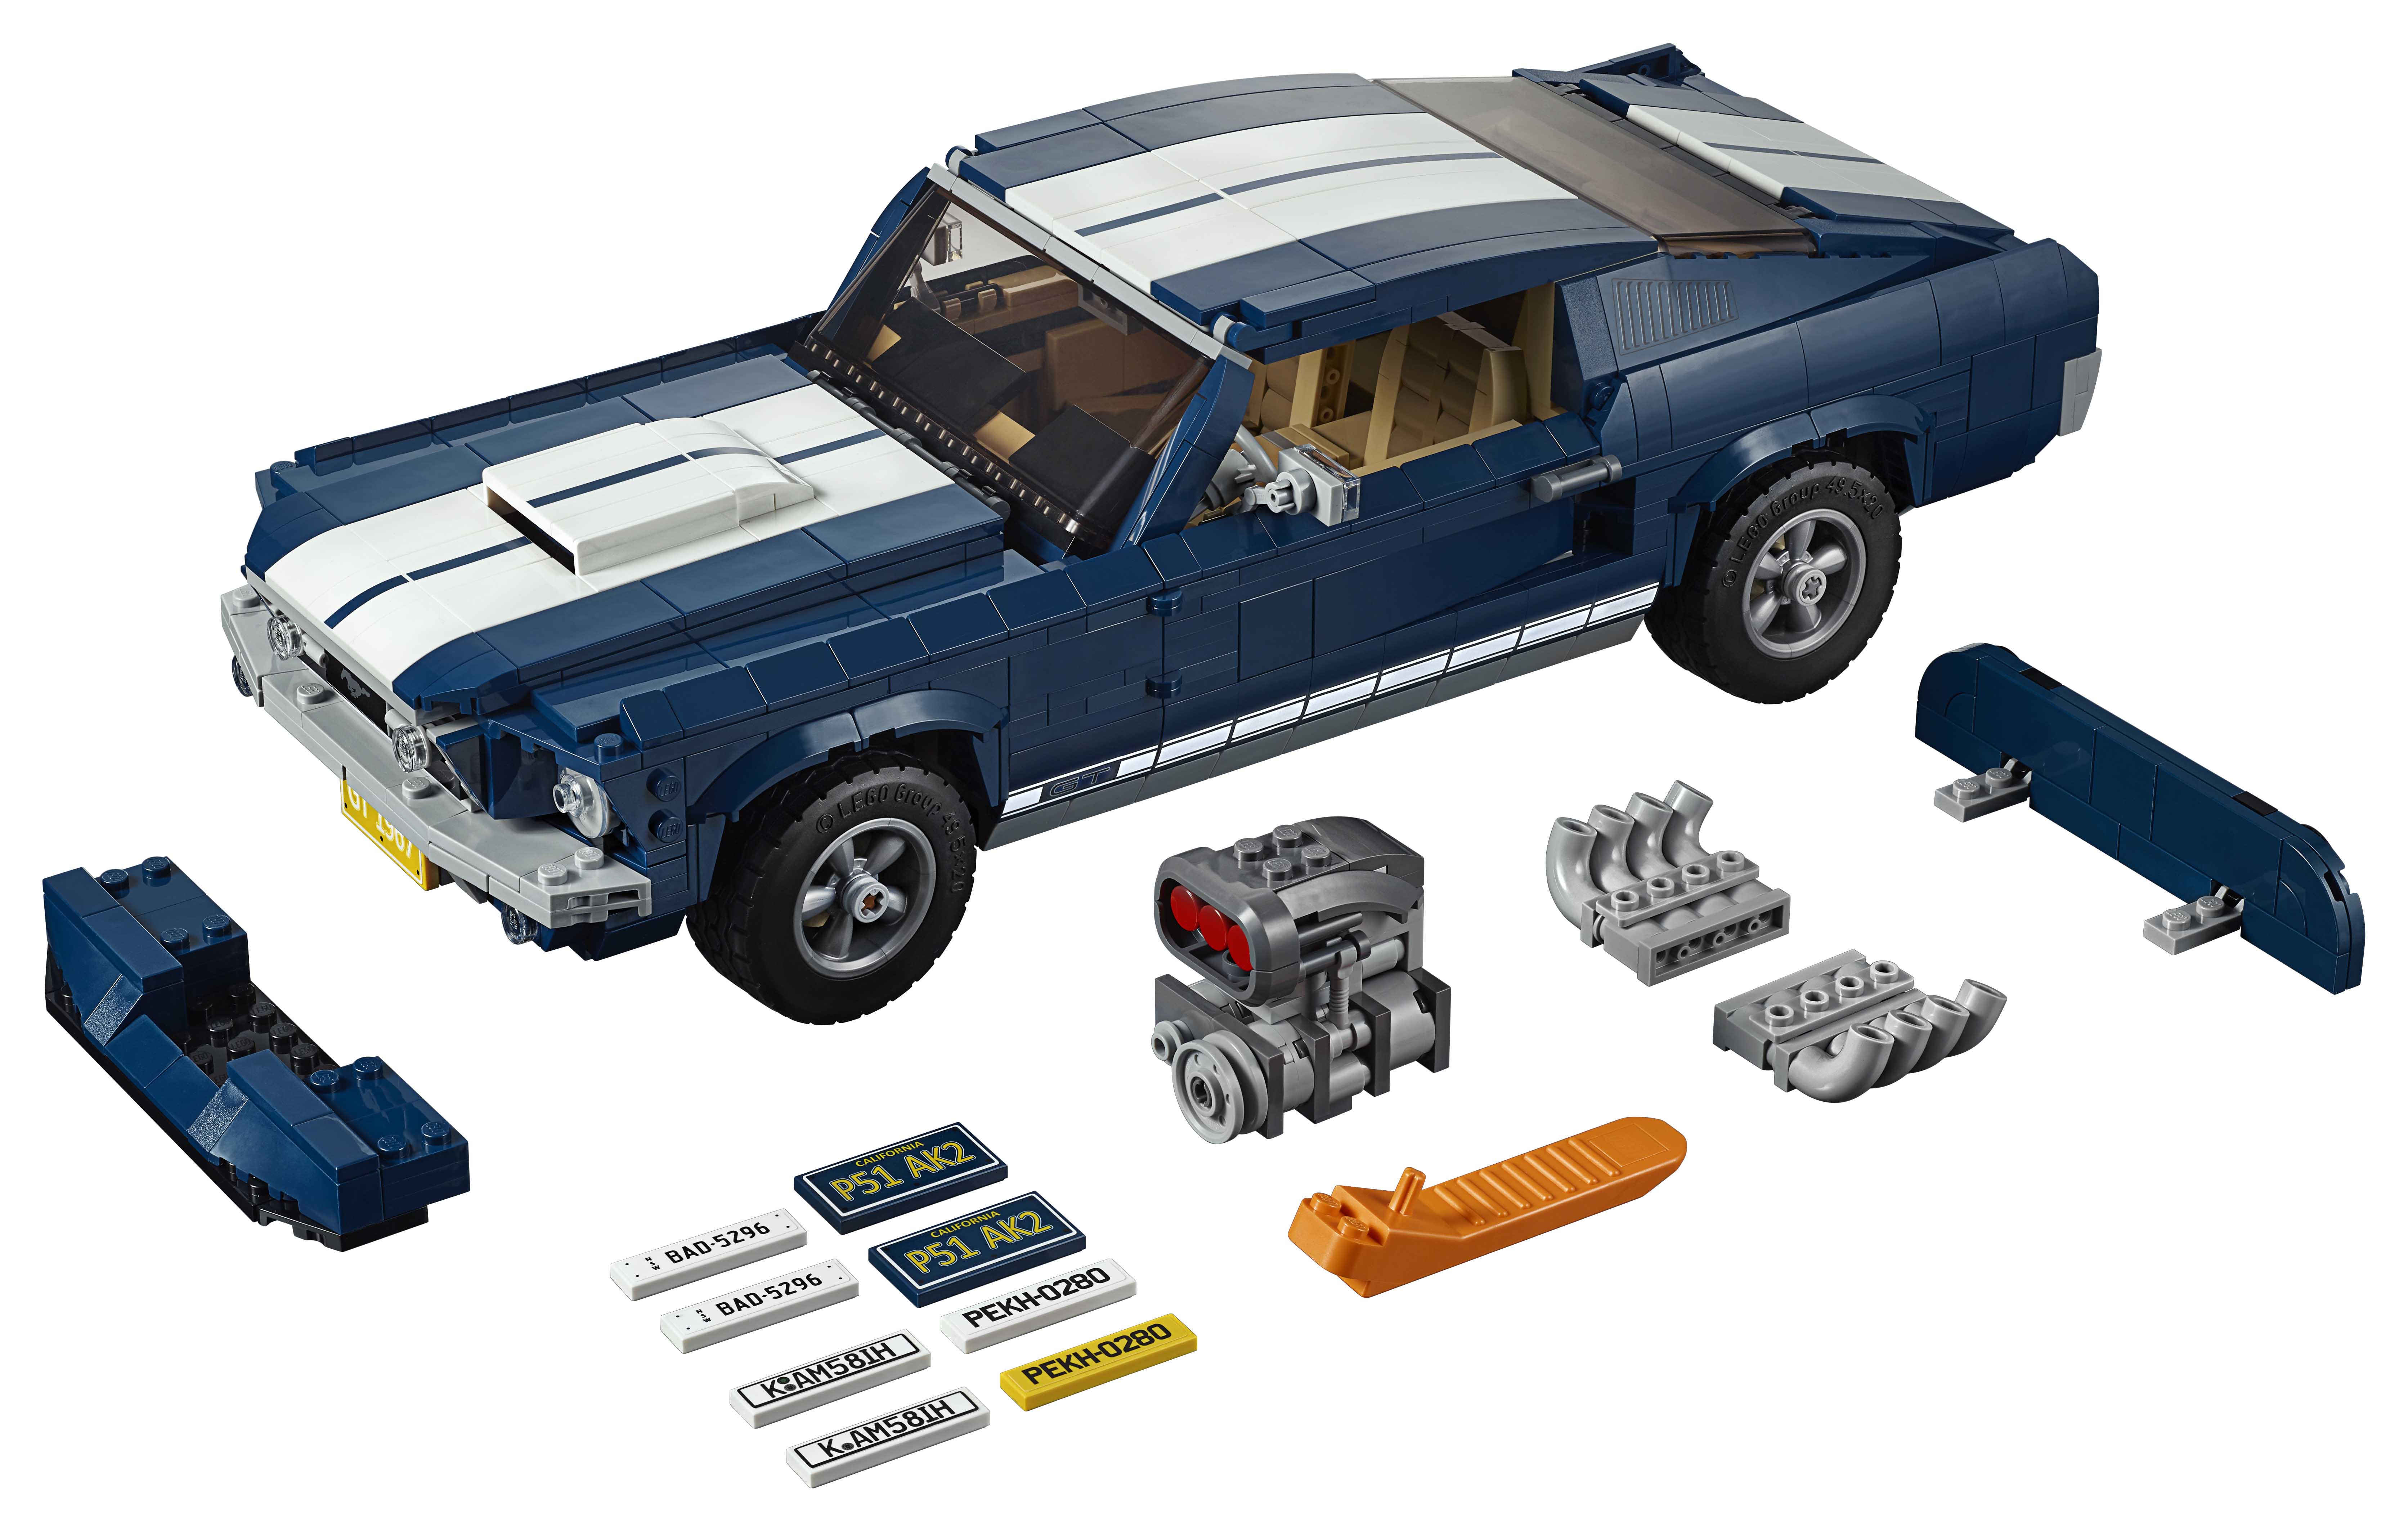 Ford Teams up with Lego for New Ford Mustang Set